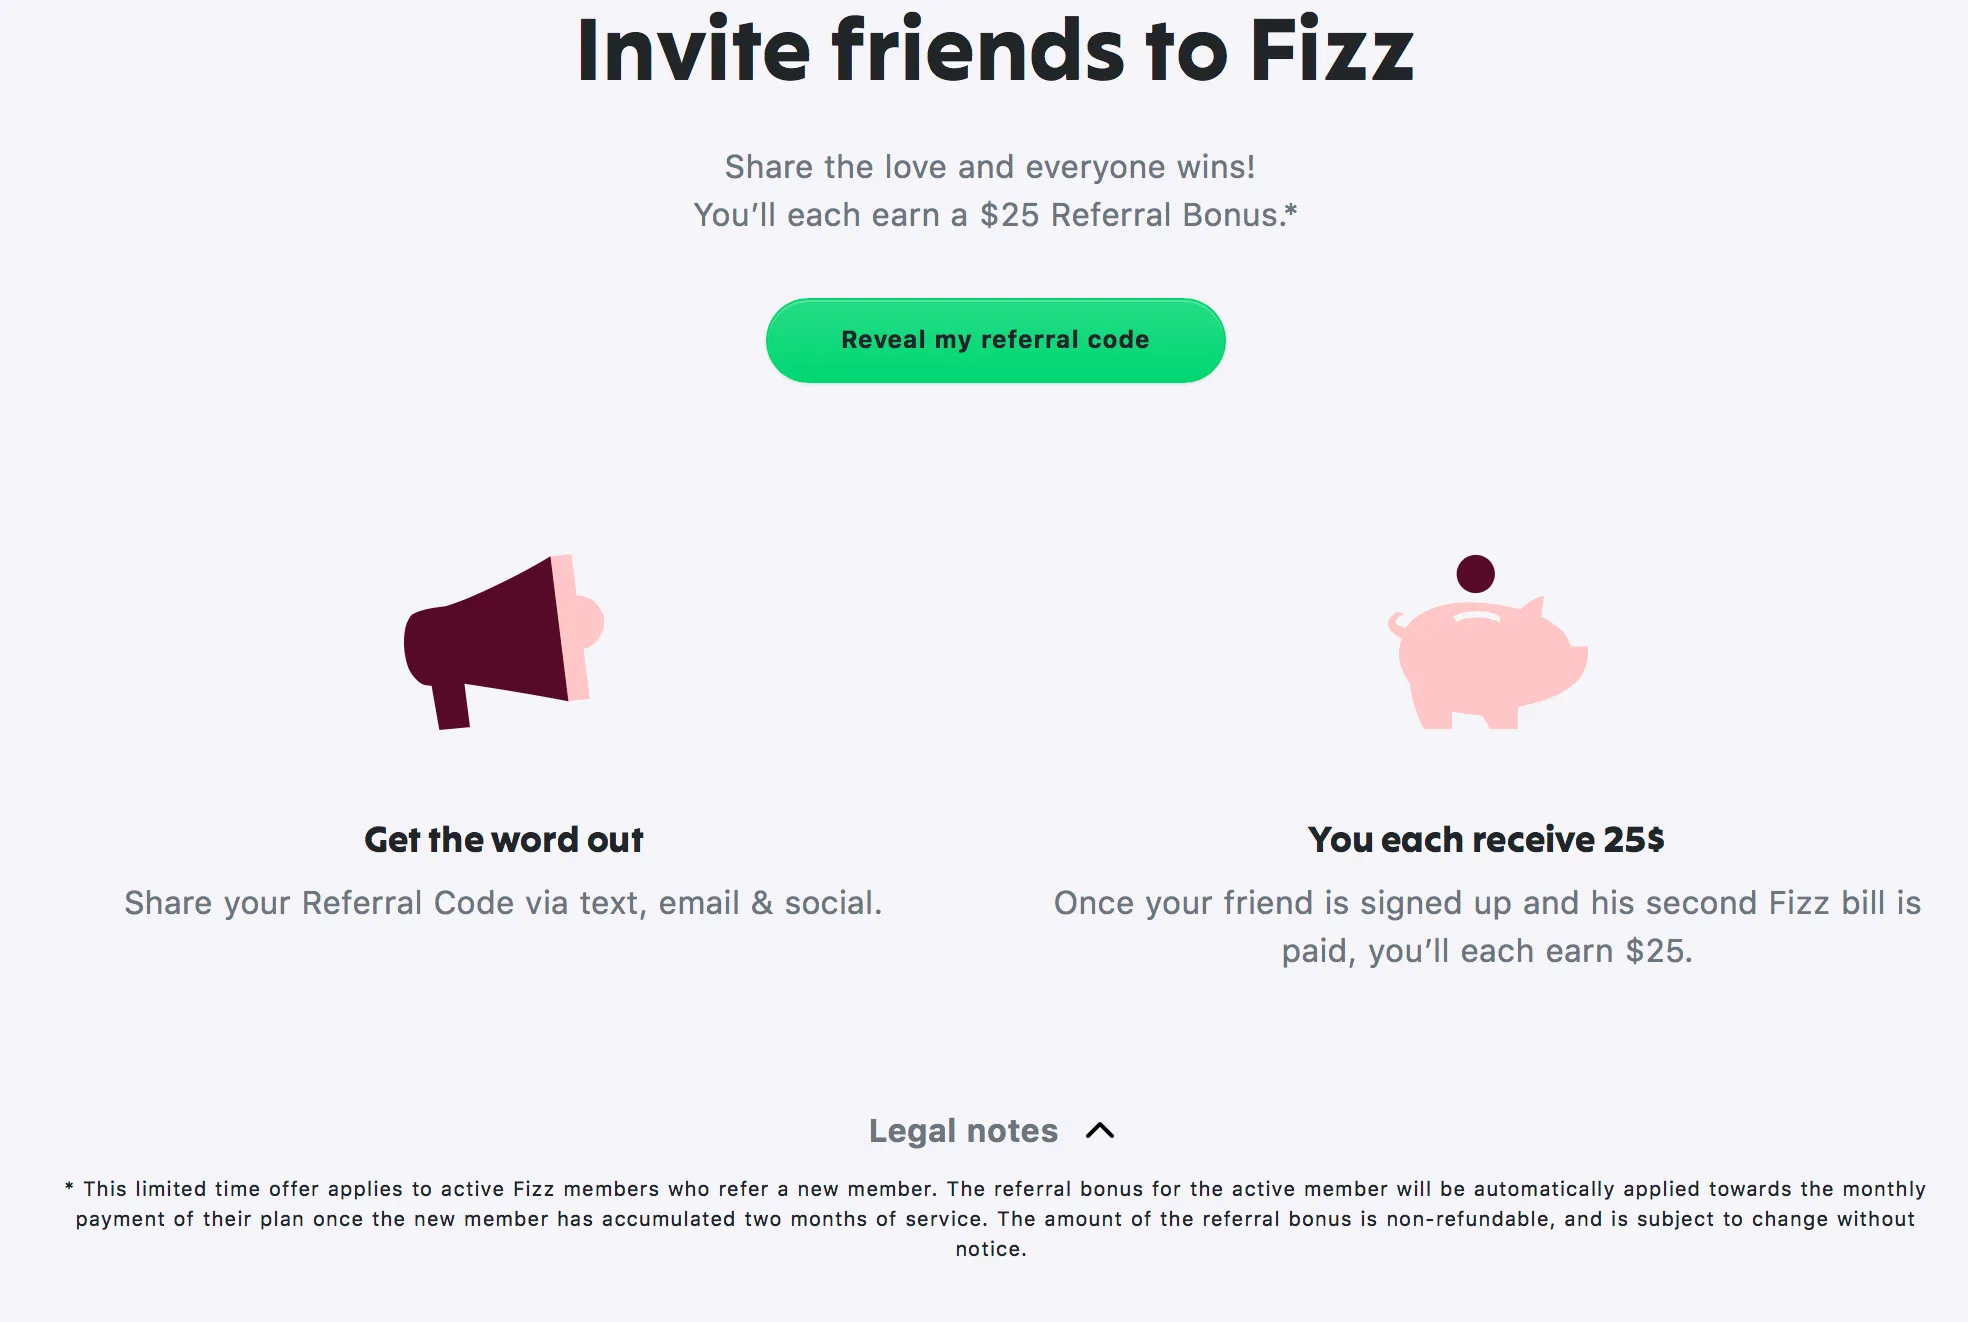 This is an interface of the Fizz referral landing page. The image includes instructions on how people can participate in the referral program and how both the referrer and referee can benefit from the program. This image is an example of how a referral program can be used to foster brand champions.